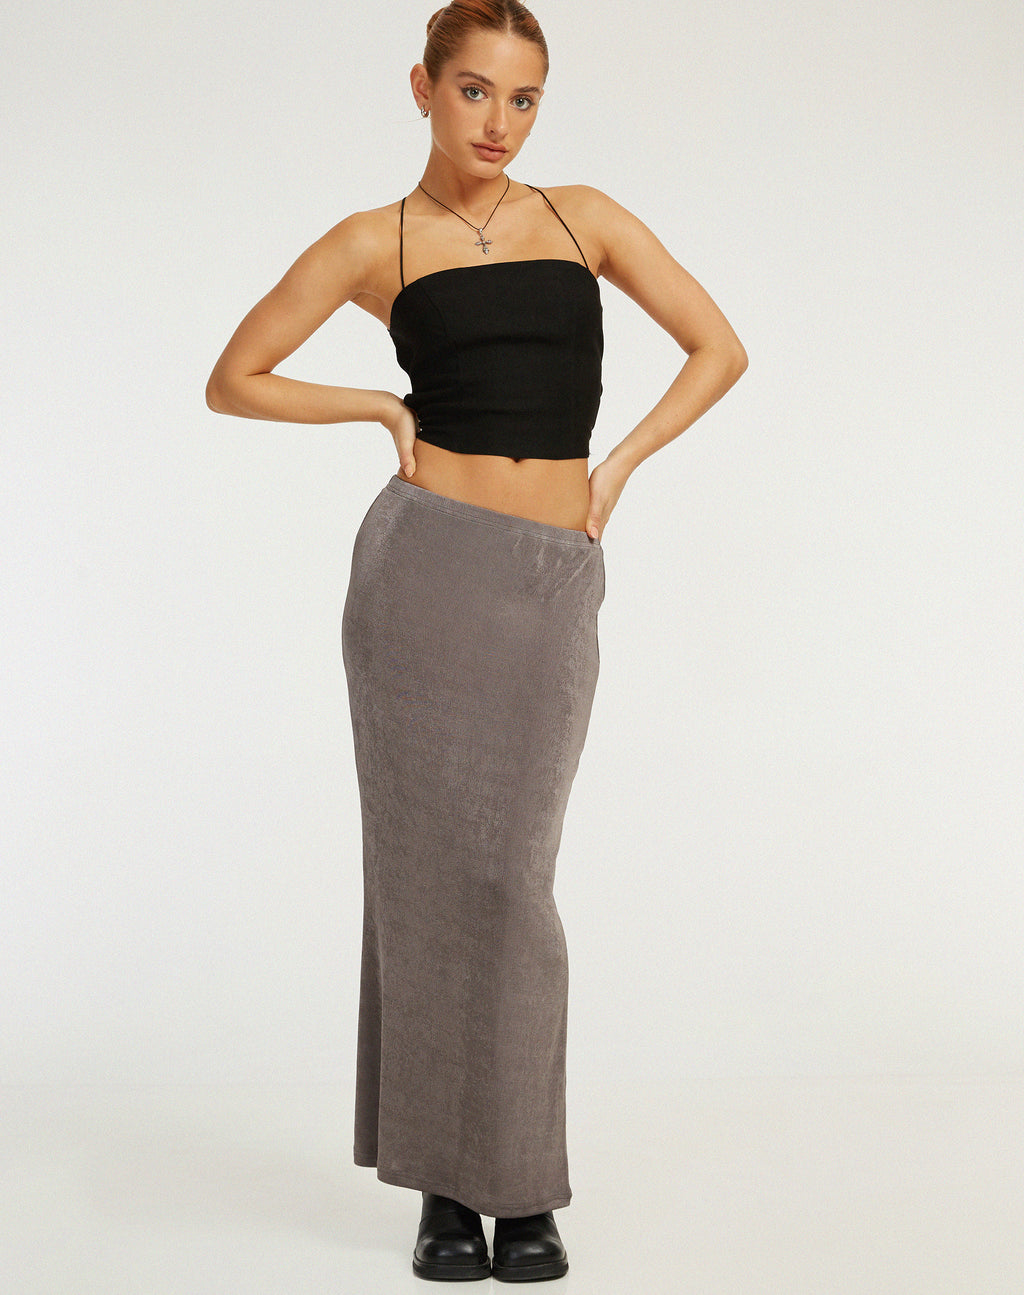 Tulus Maxi Skirt in Charcoal